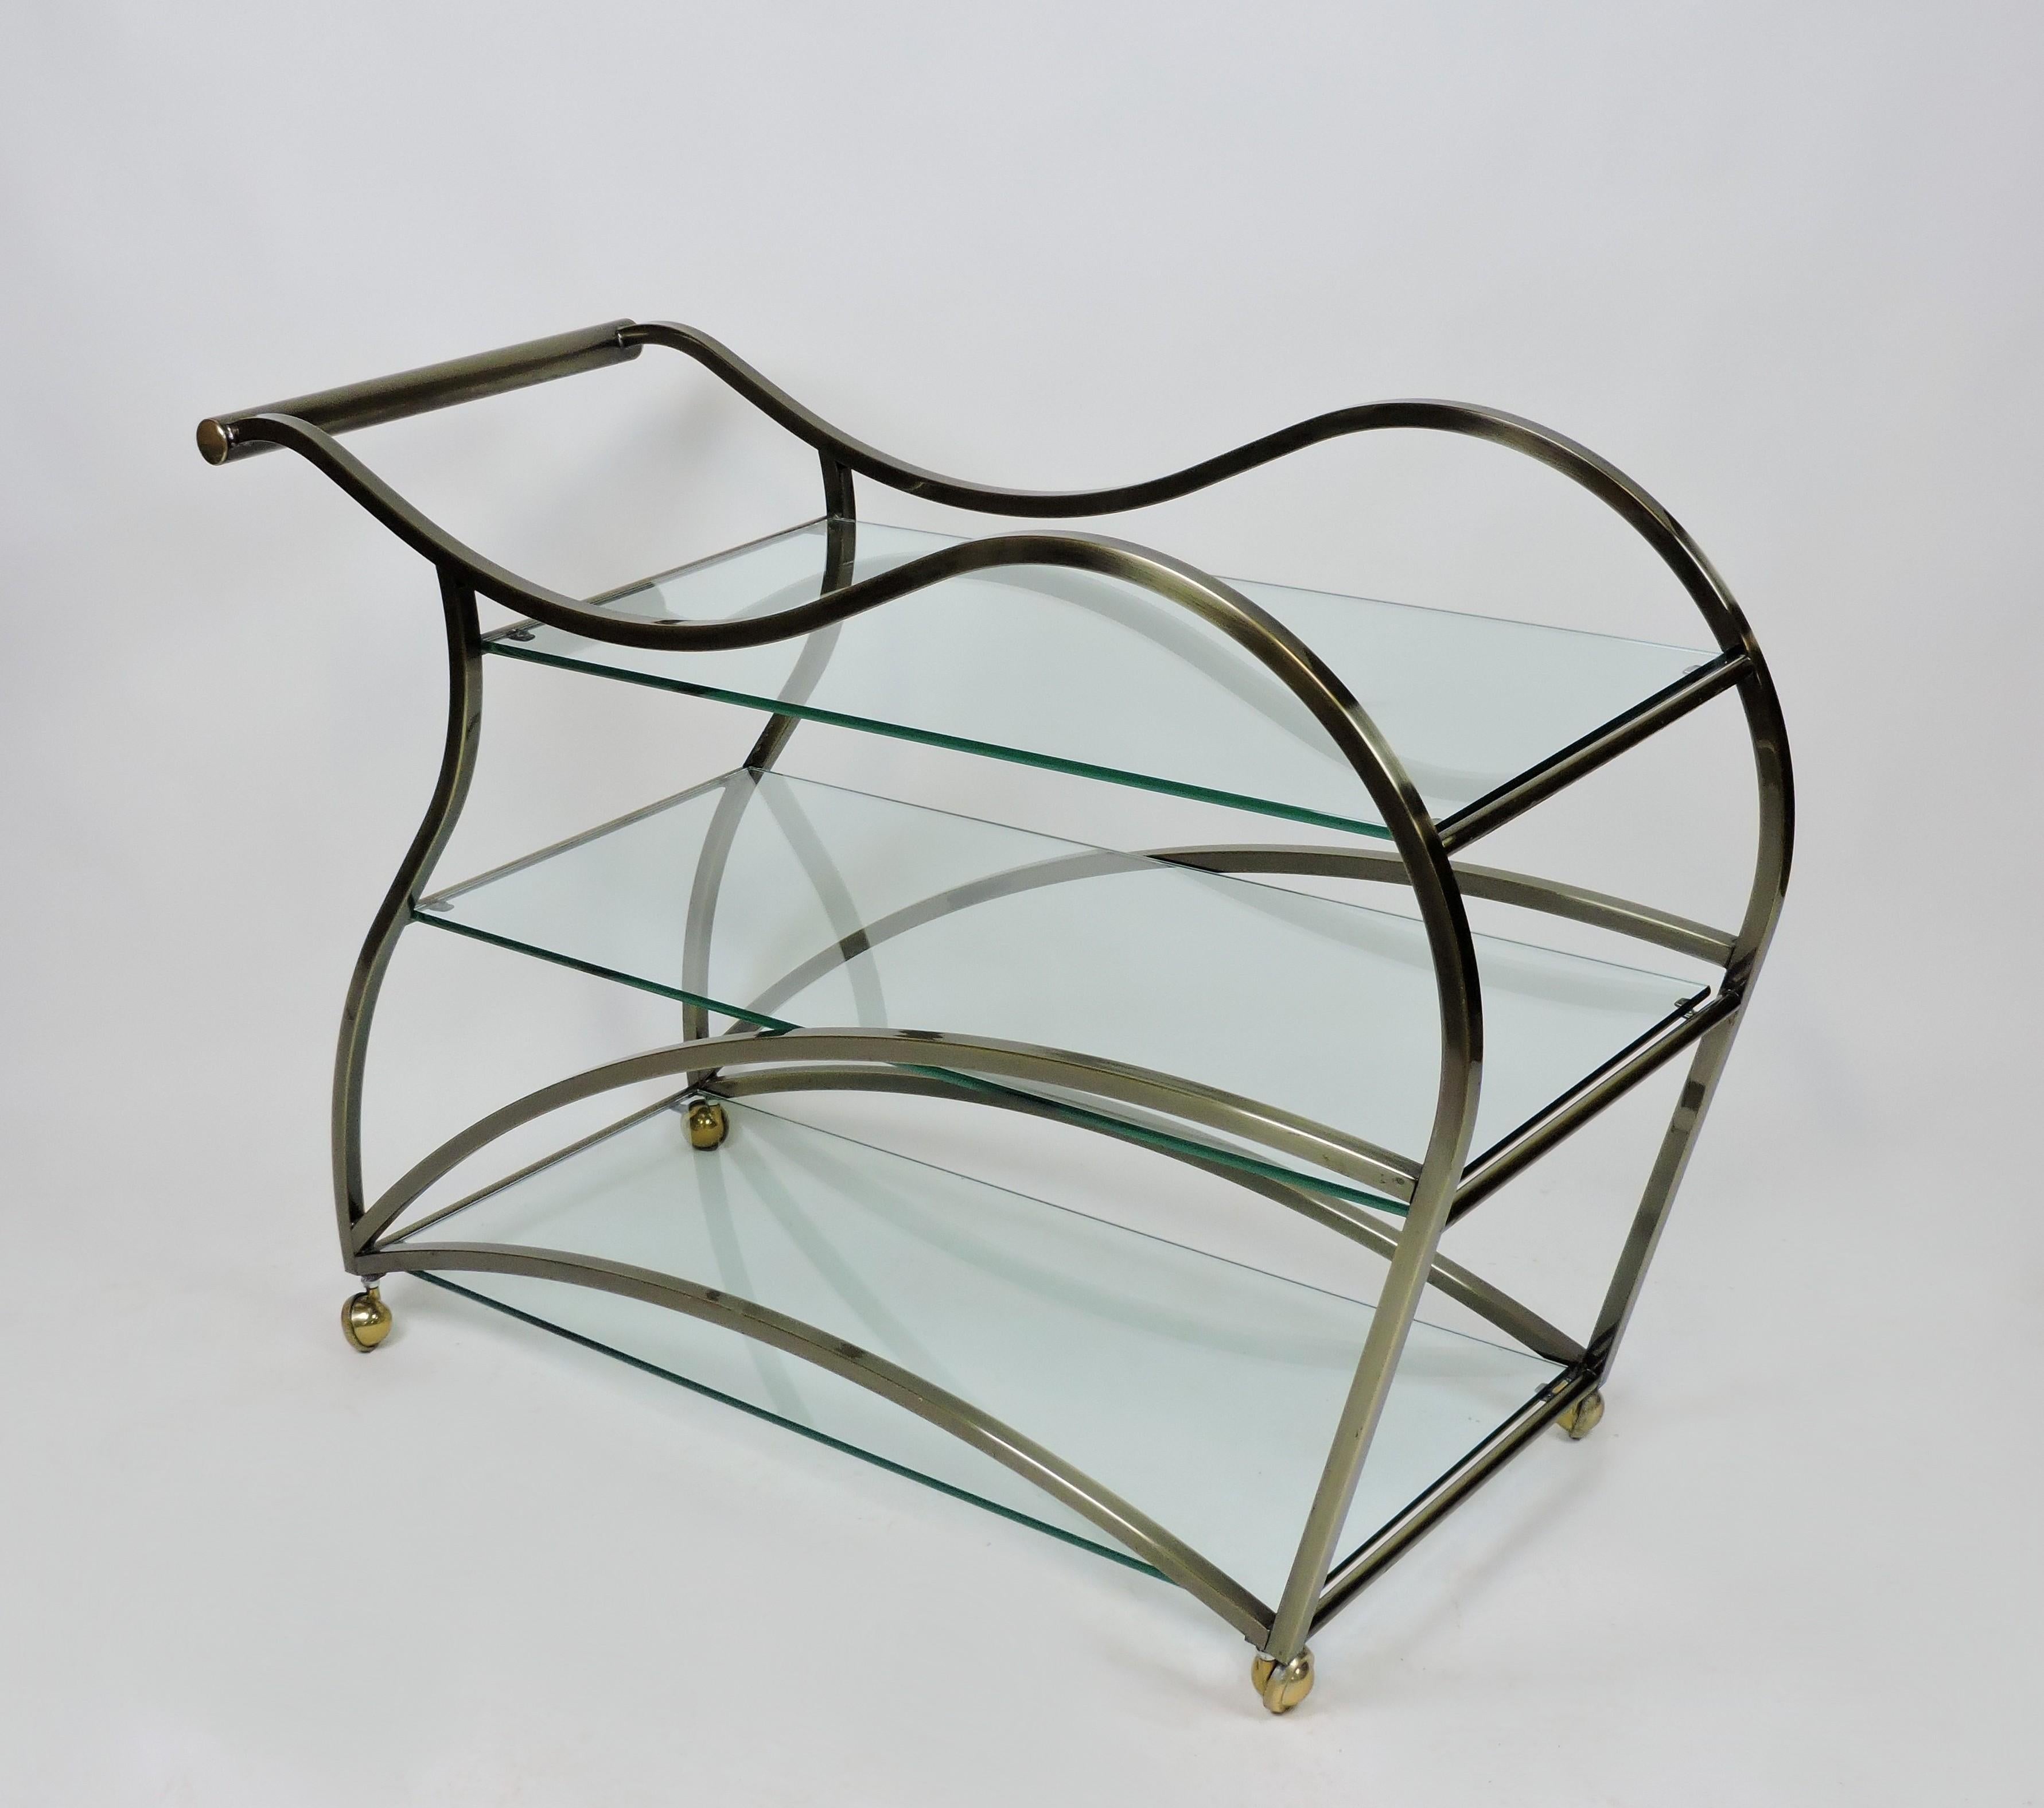 Sexy and curvaceous sculptural bar or tea cart manufactured by high quality furniture maker, Design Institute of America. This rolling cart has a metal frame with an antiqued brass finish and three, 3/8 inch thick, clear glass shelves. Its large